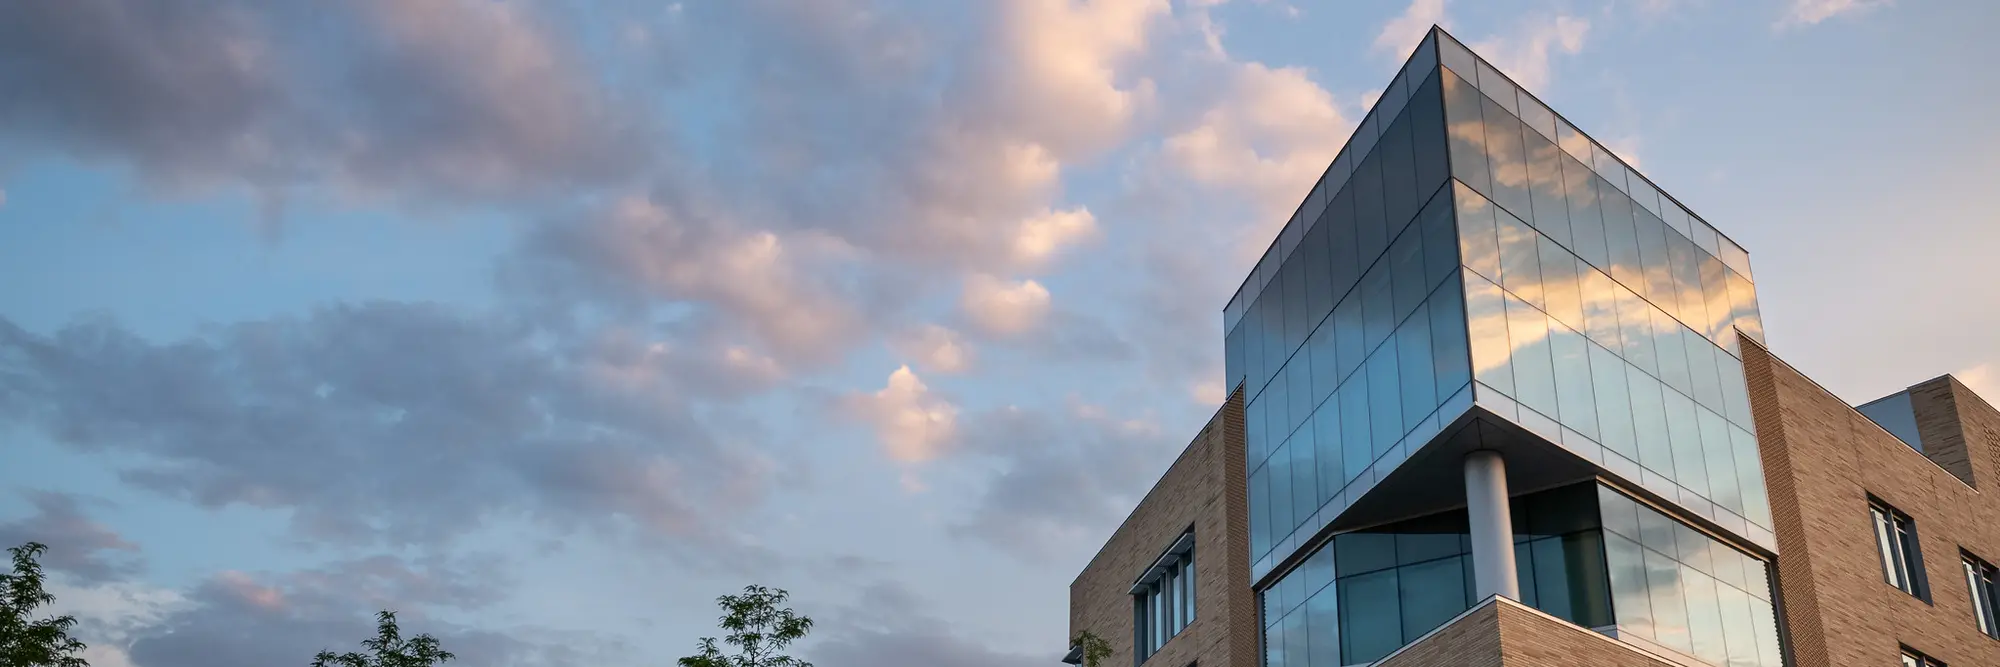 Outside of Posner Hall at sunset